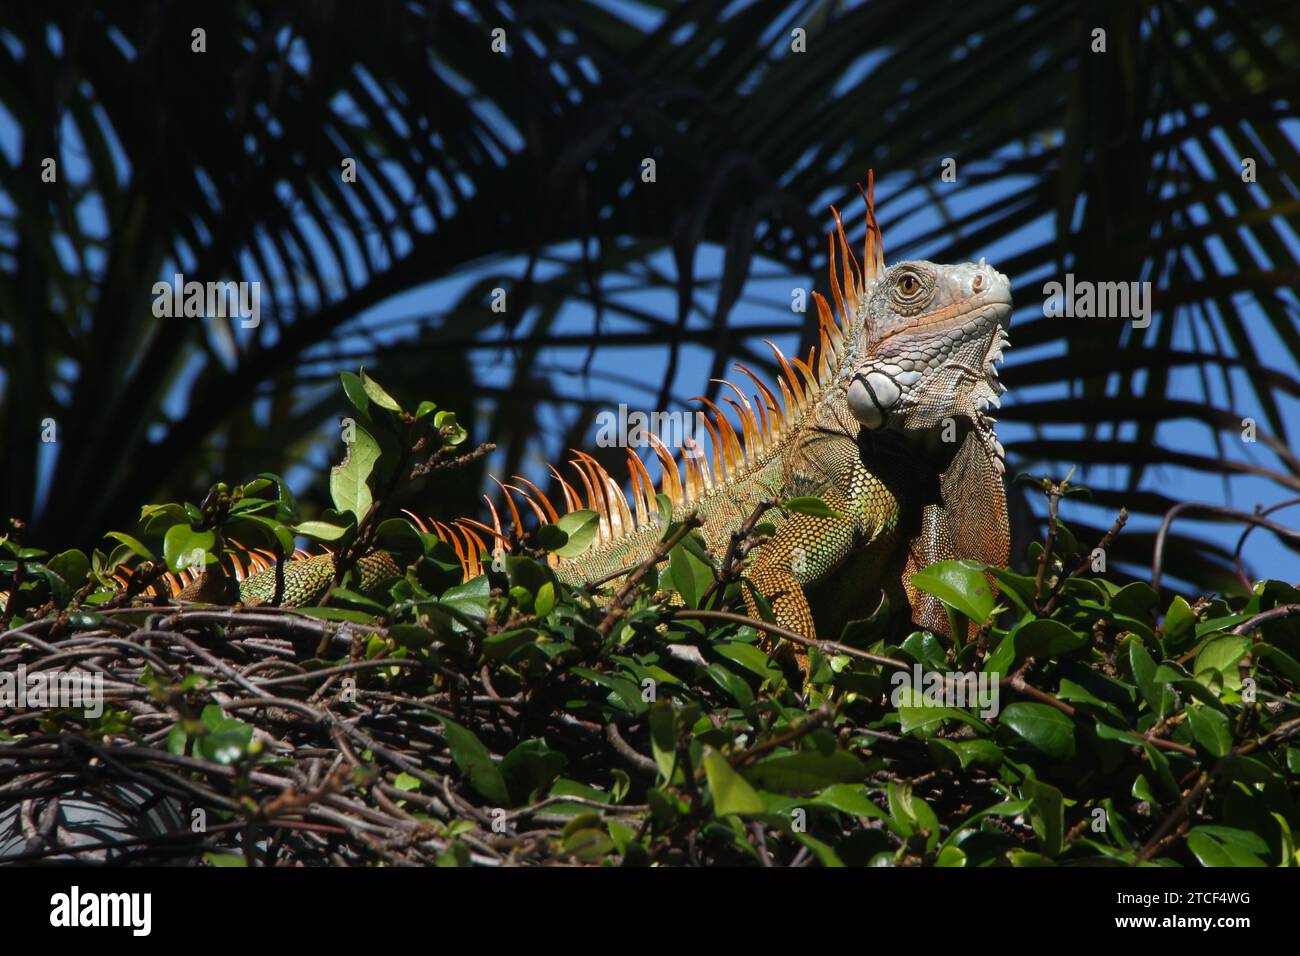 Large green and orange iguana sunning on top of foliage hedge against silhouette of palm tree and blue sky in the background, Florida Keys Stock Photo